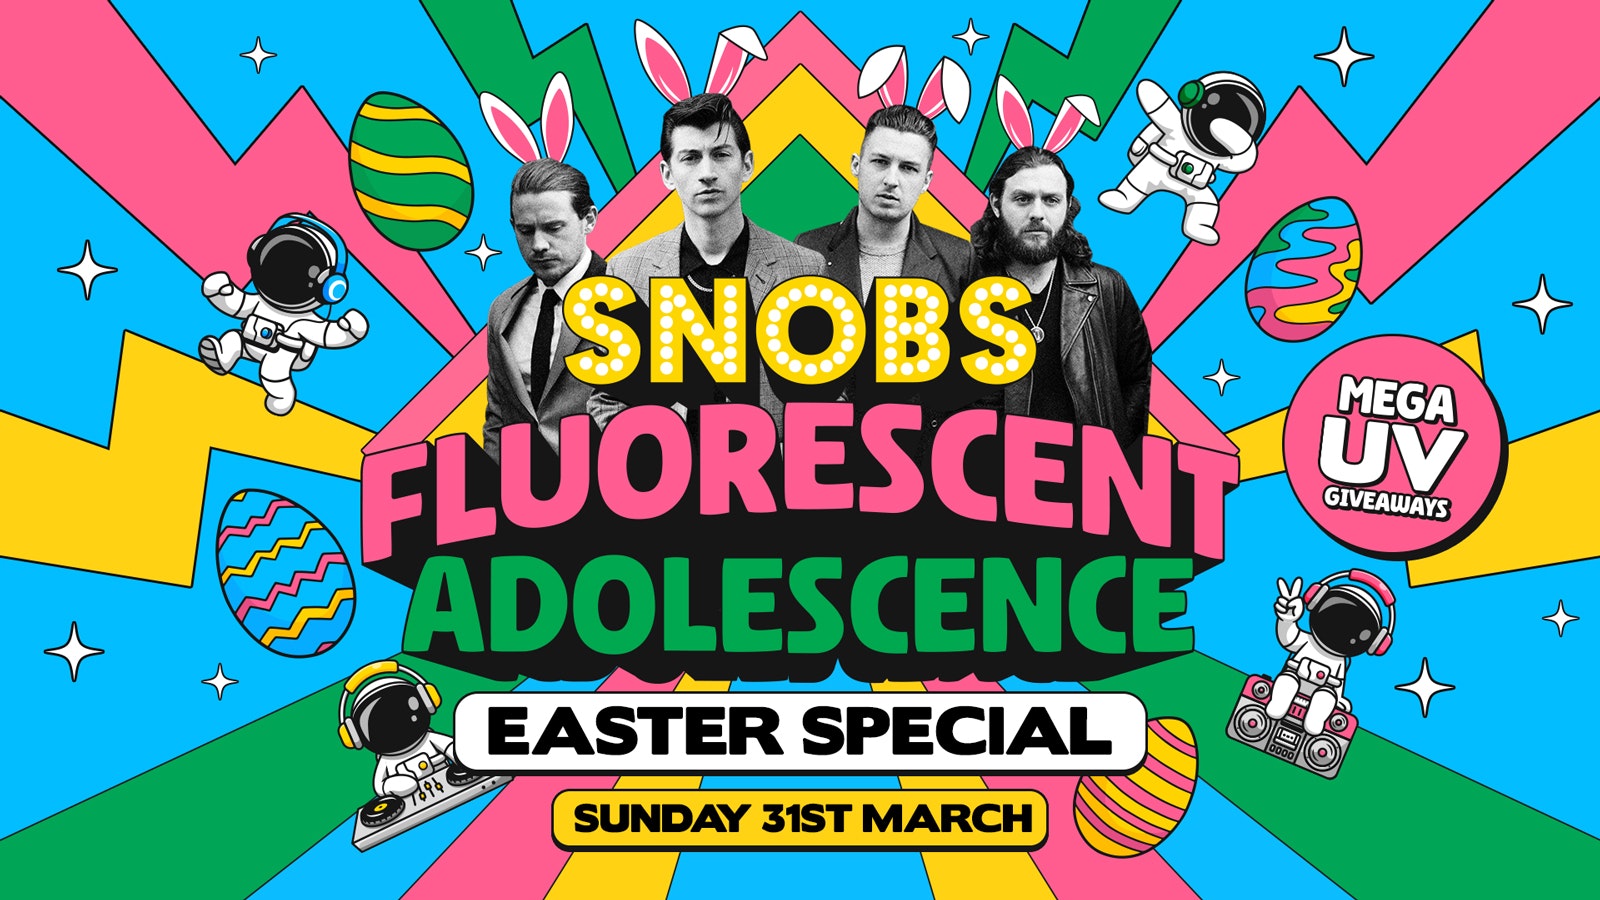 Fluorescent Adolescence!! 🐣 EASTER SUNDAY SPECIAL 💥 31st Mar